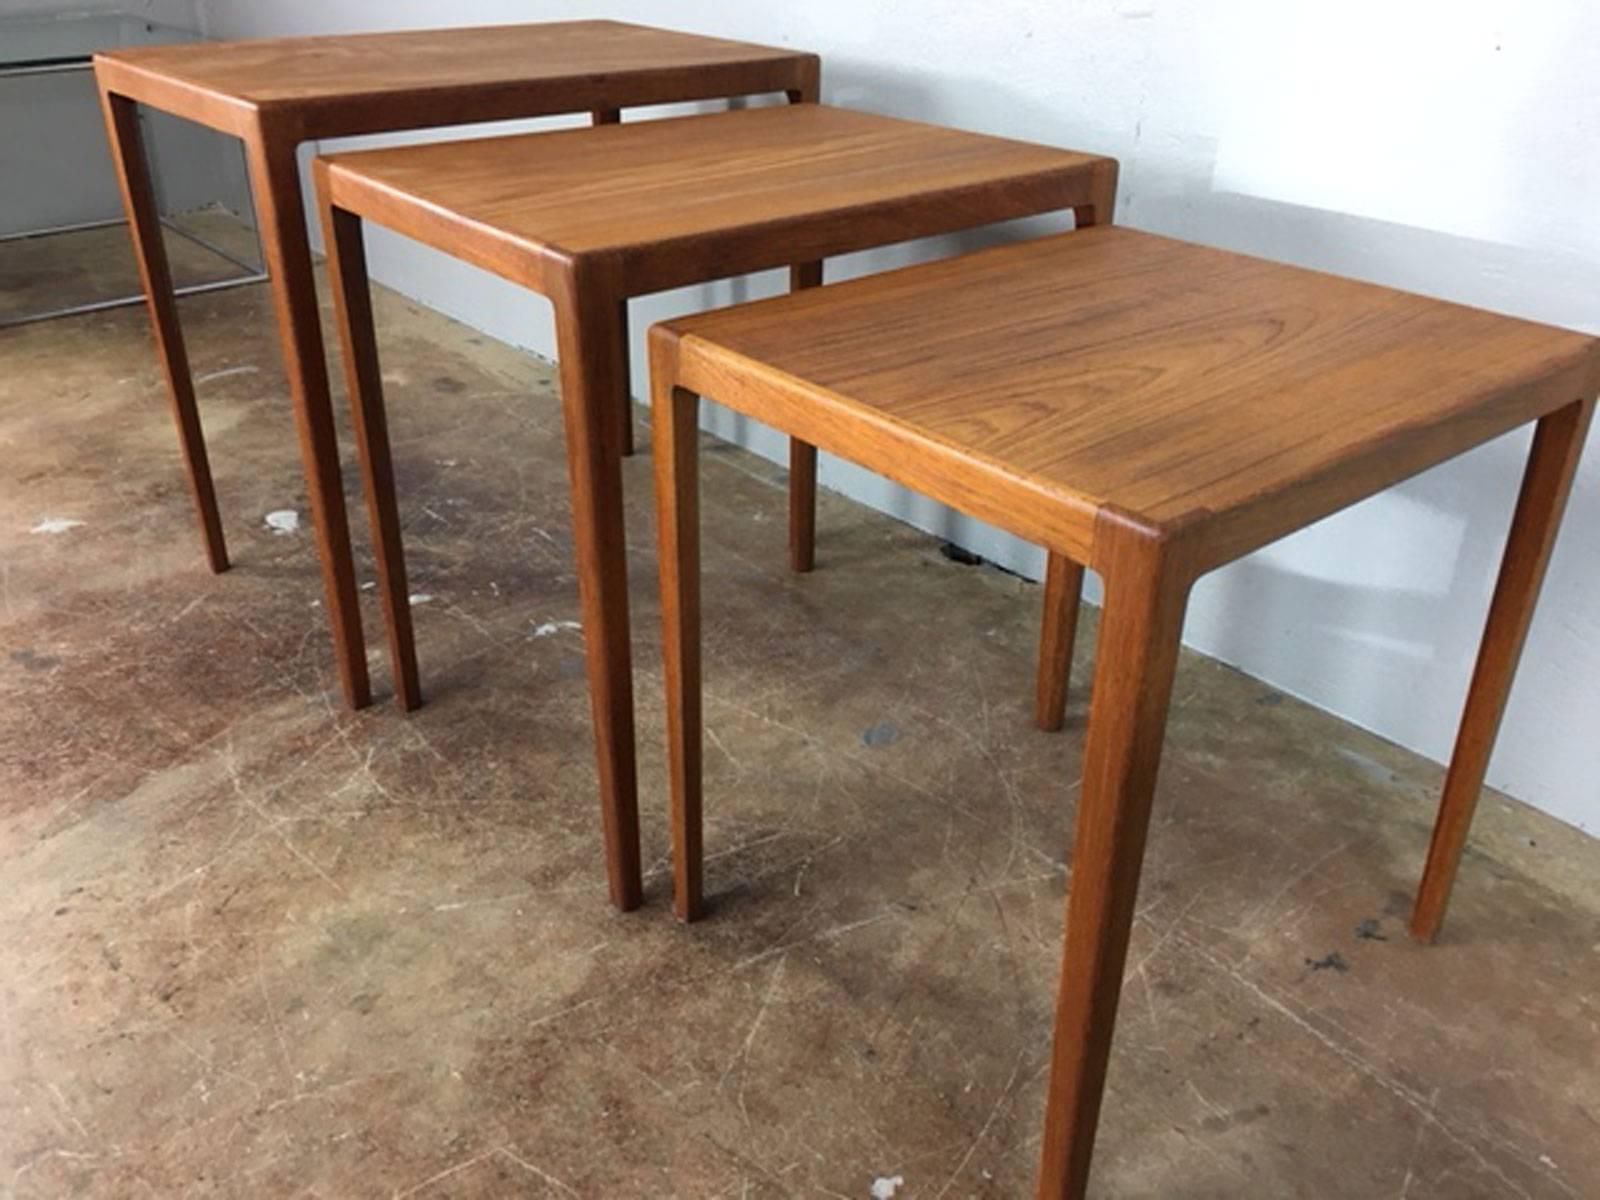 Danish Architect Eske Kristensen designed these teak nesting tables and cabinet maker Ludwig Pontoppidan crafted this set. Solid teak. Extremely well done tables. Original excellent condition.